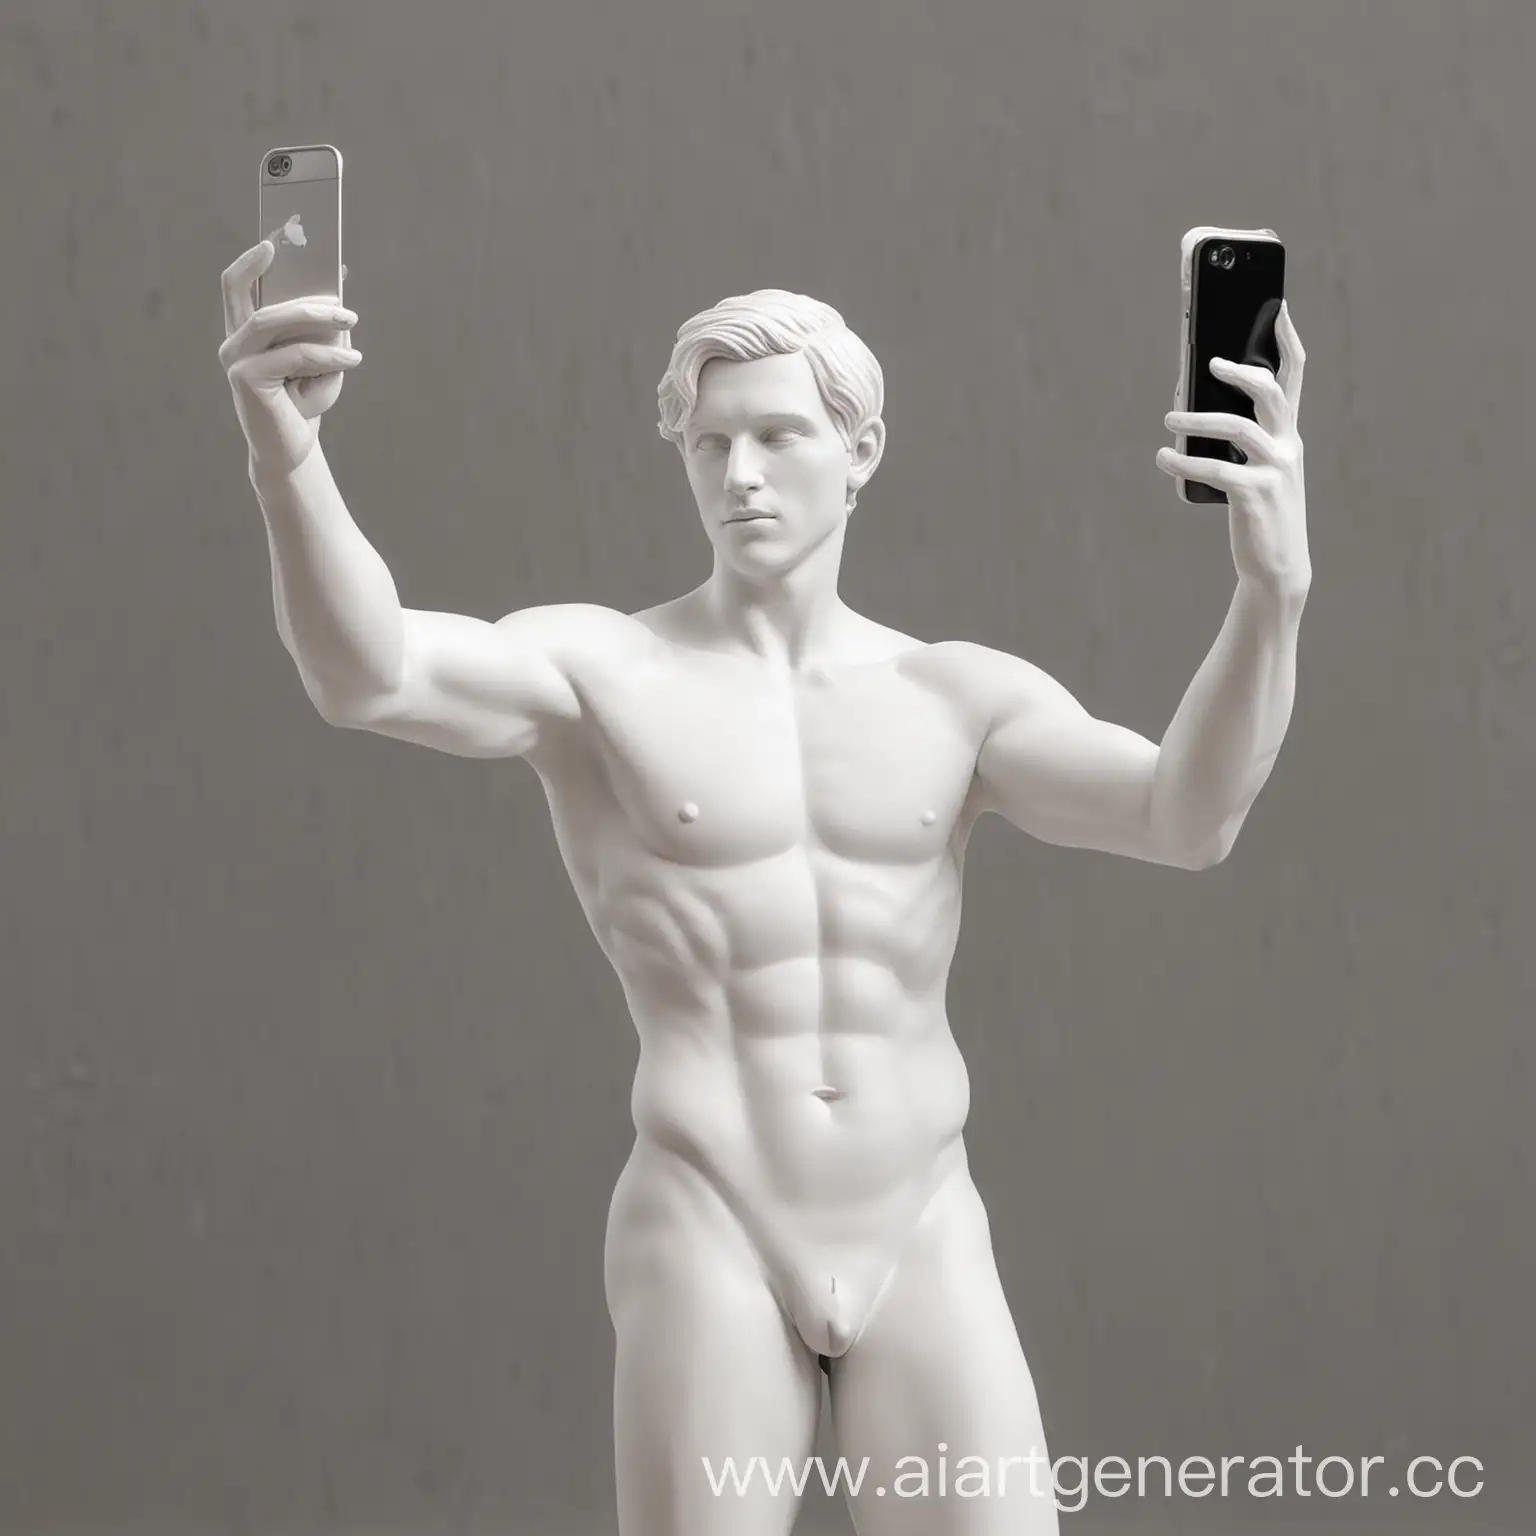 White-Sculpture-Taking-a-Selfie-with-Smartphone